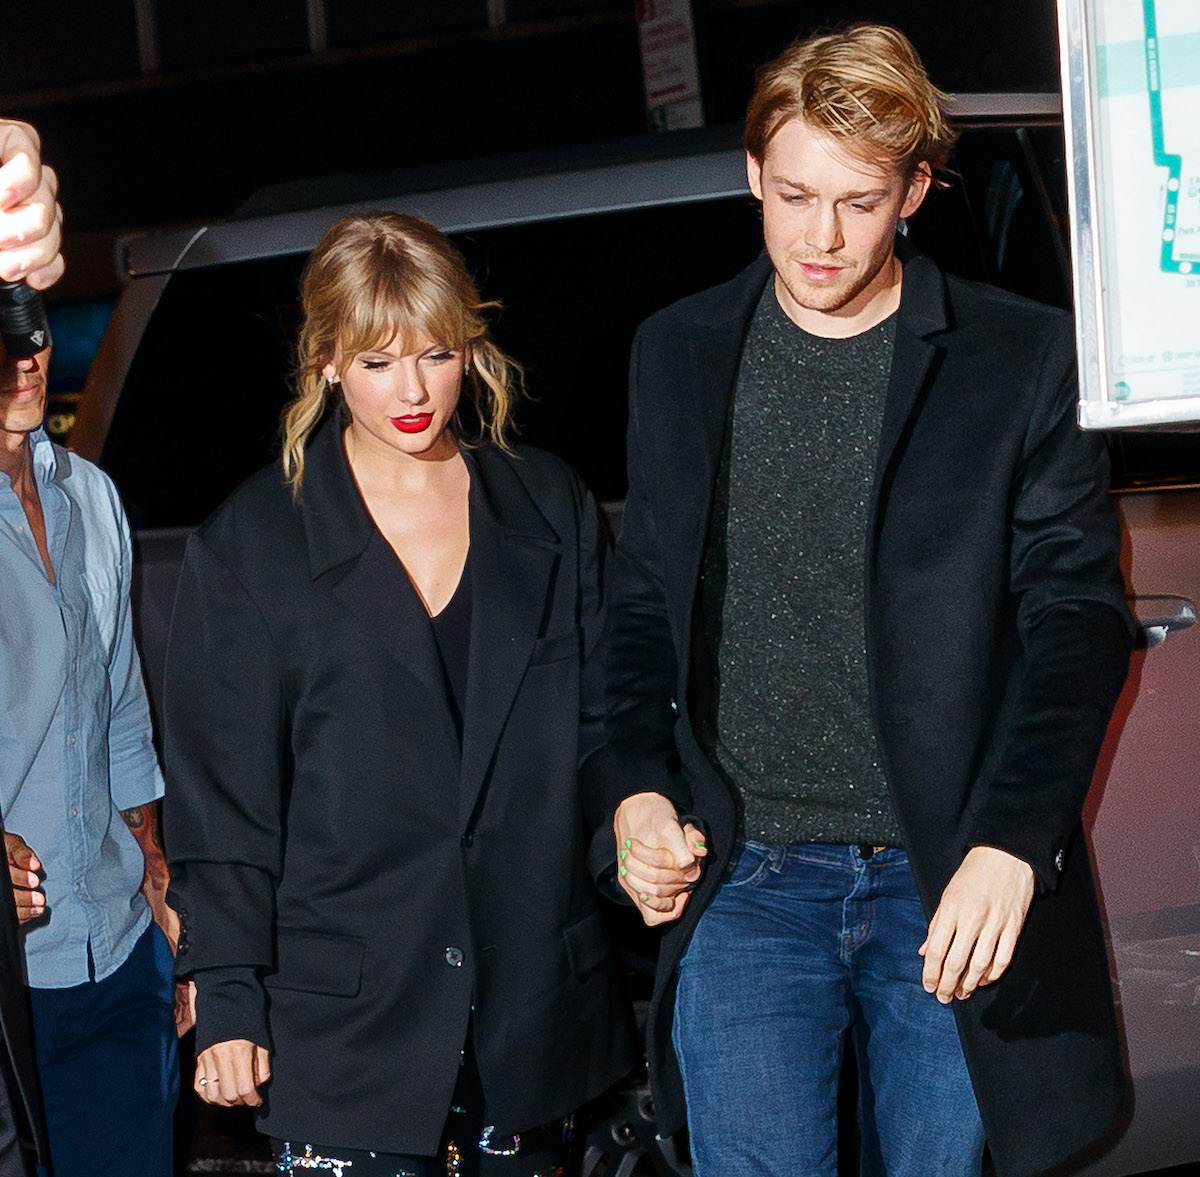 Taylor Swift and her boyfriend, Joe Alwyn, hold hands while leaving a car